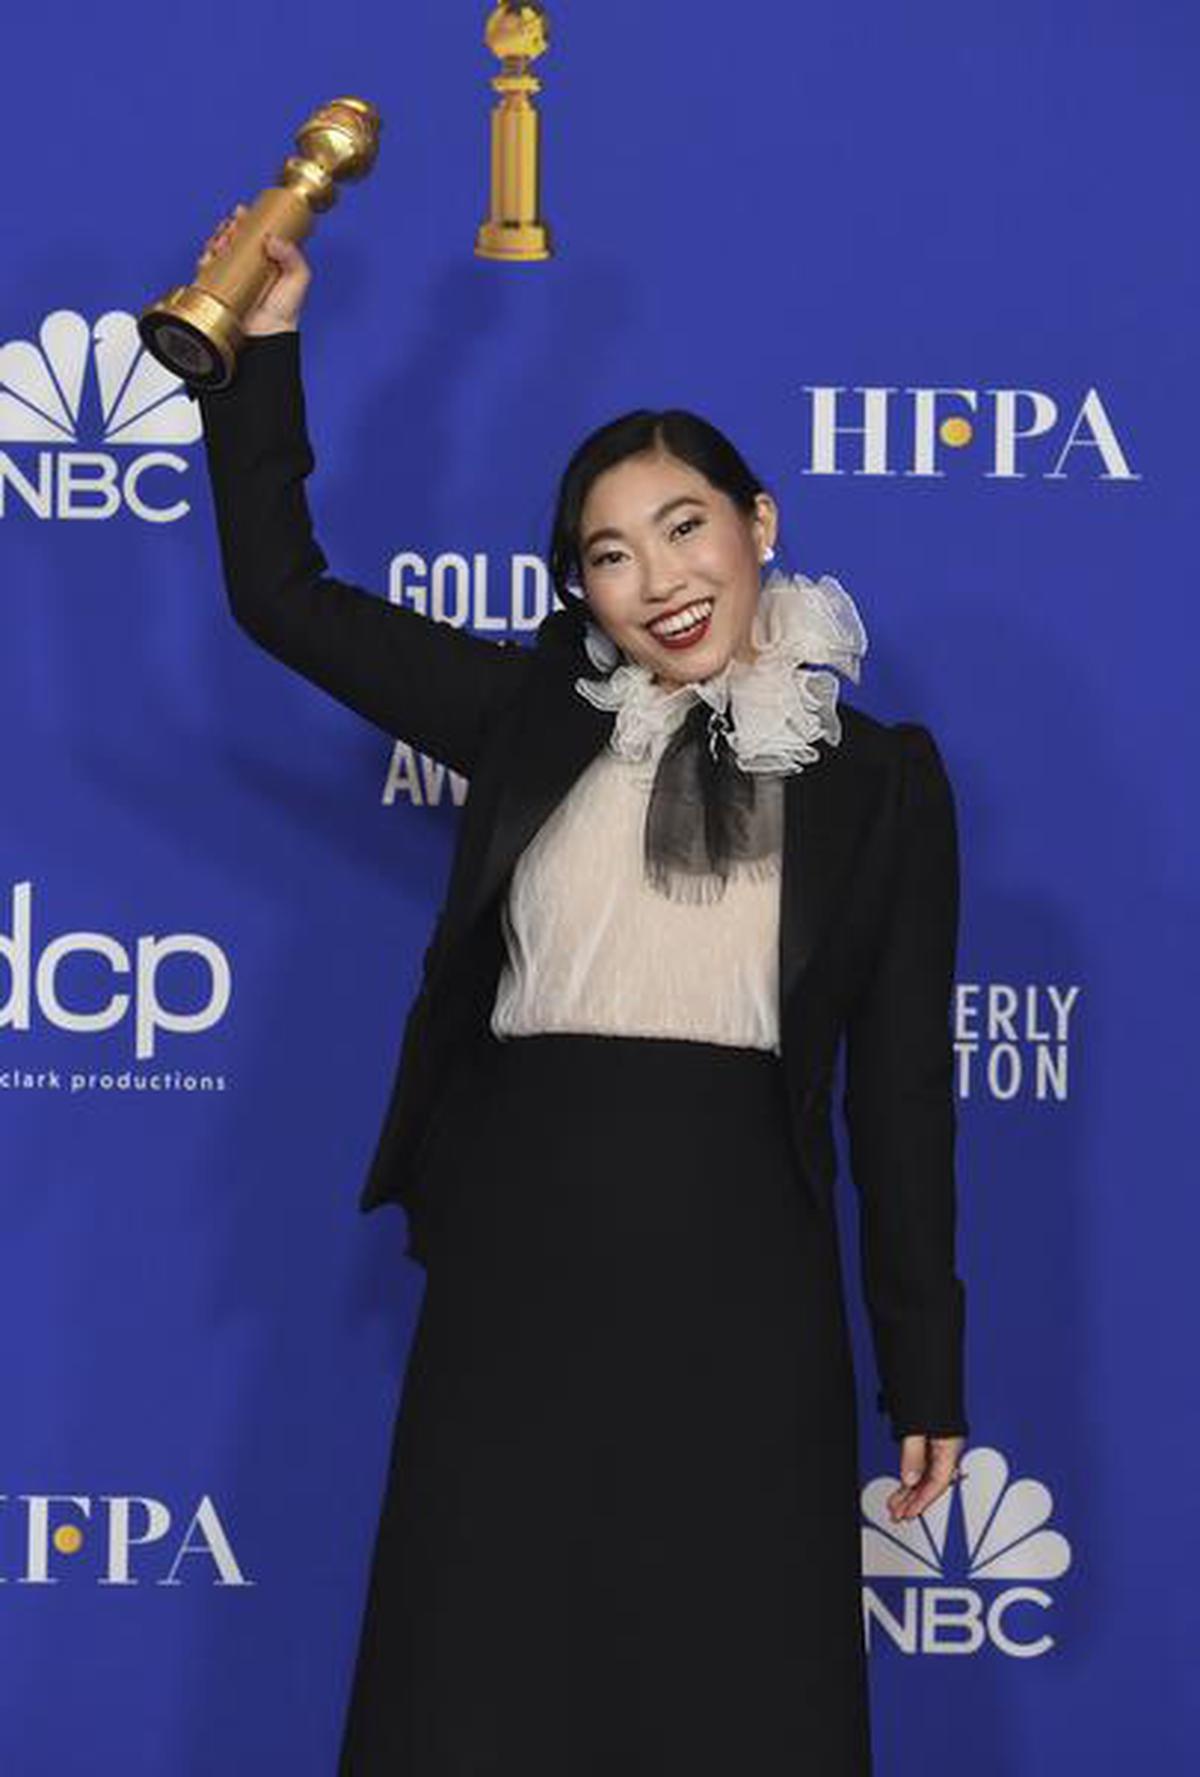 Awkwafina with the Golden Globe for Best Performance by an Actress in a Motion Picture, Musical or Comedy for ‘The Farewell’ at the 77th annual Golden Globe Awards at the Beverly Hilton, in 2020.